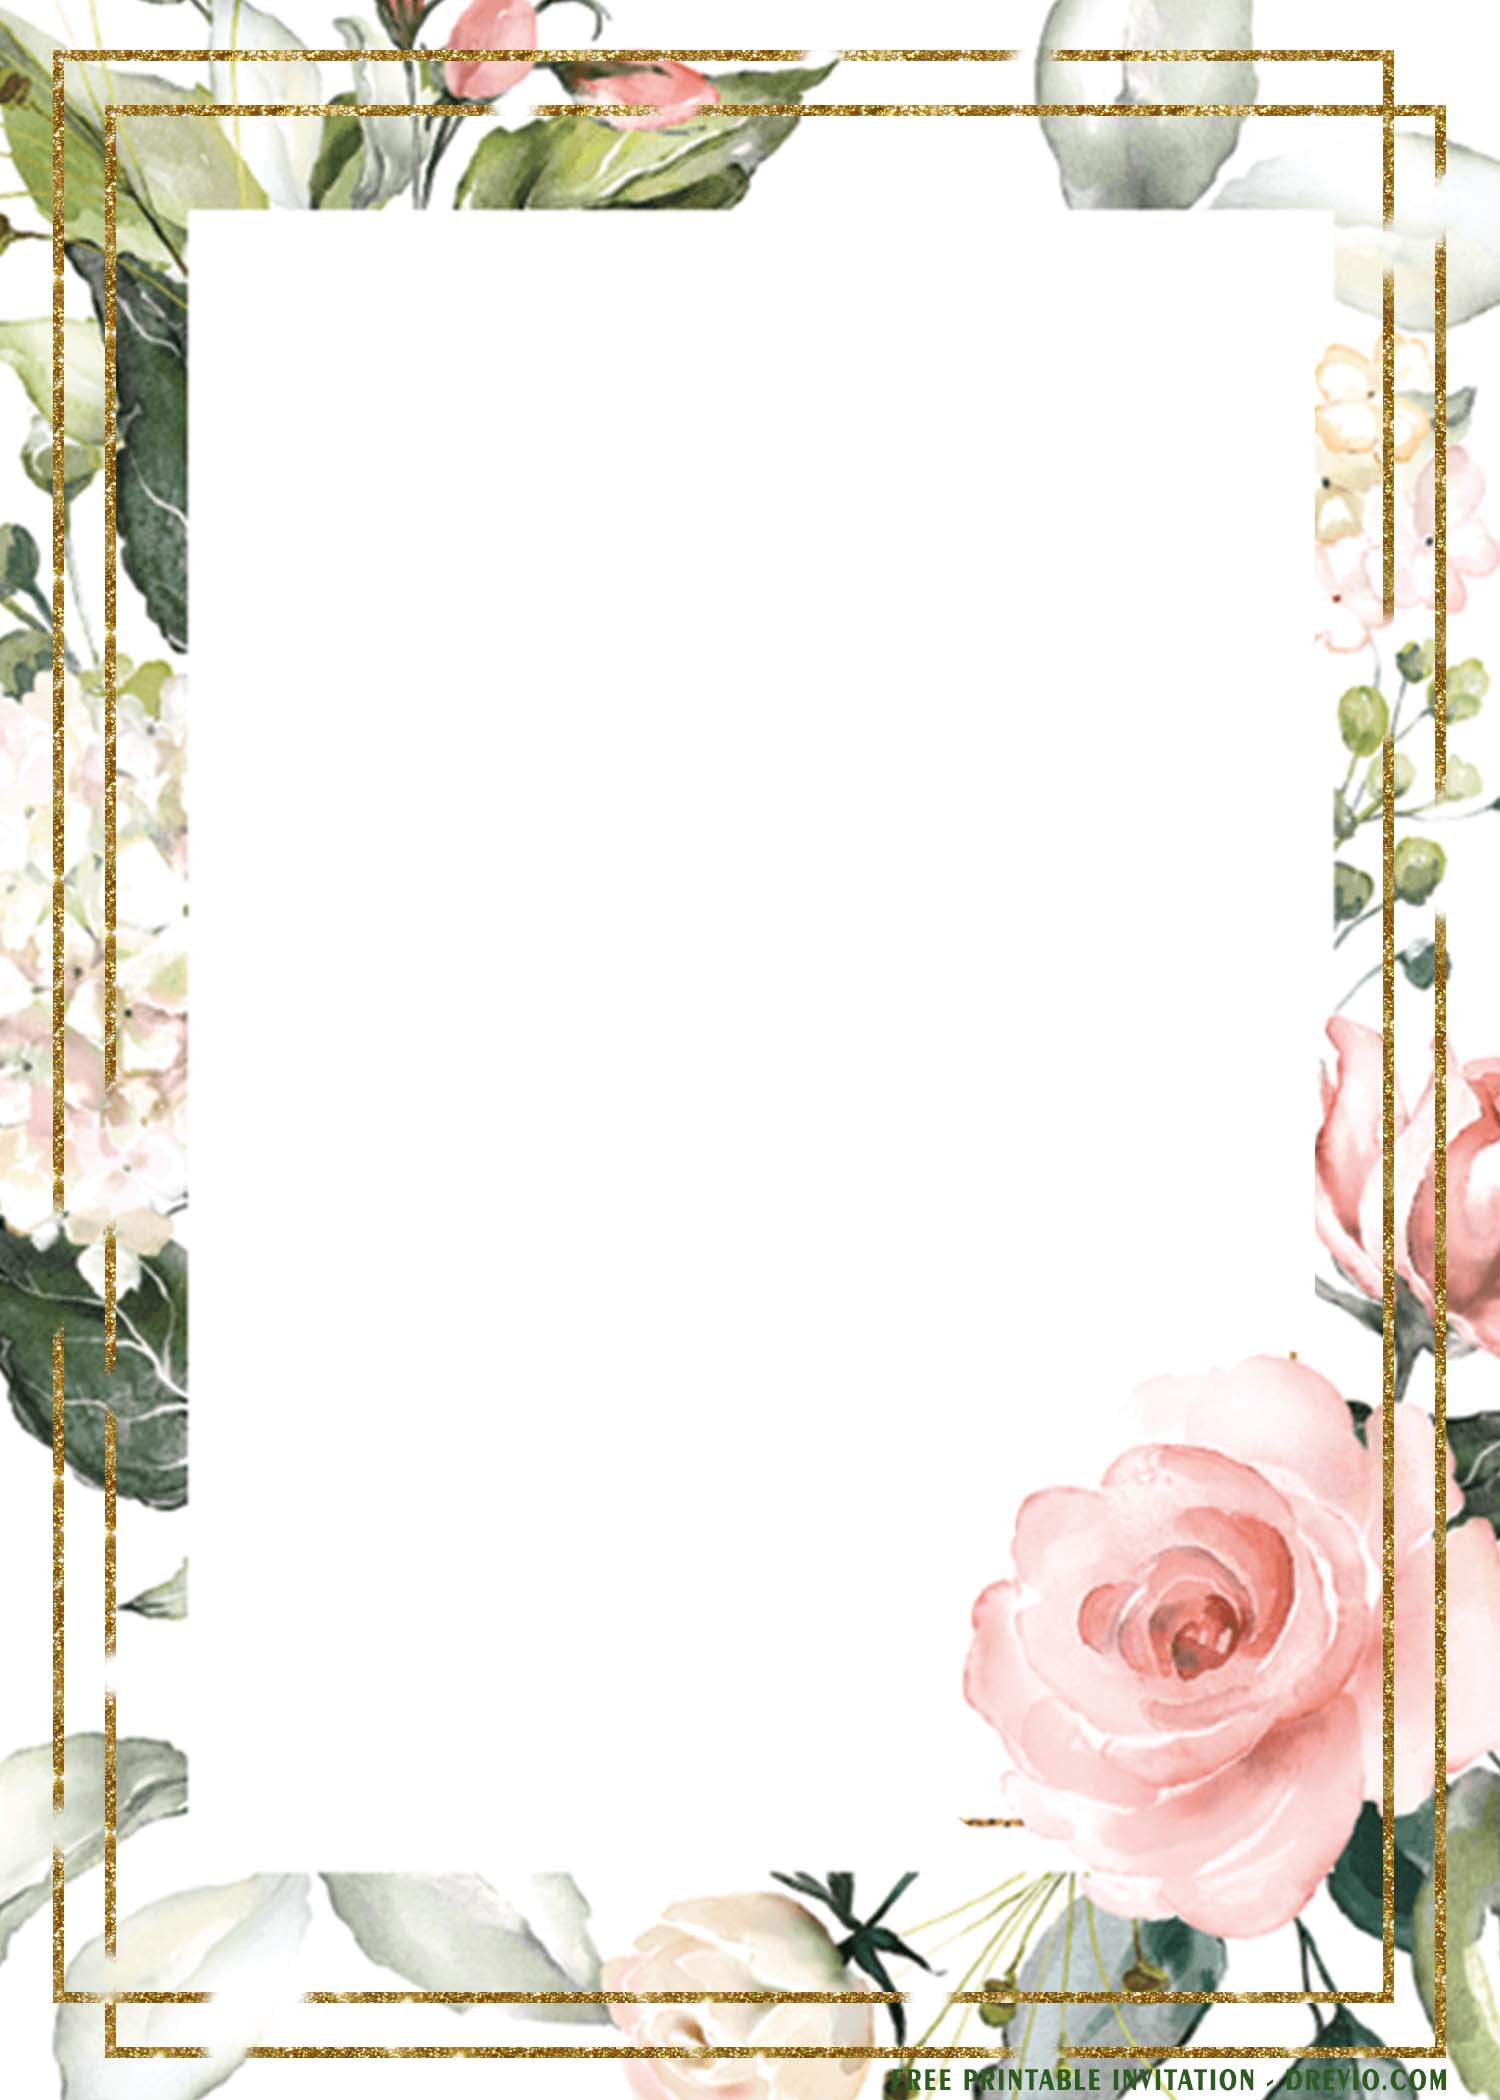 (FREE Printable) - Floral Frame Invitation Templates - for Any ...